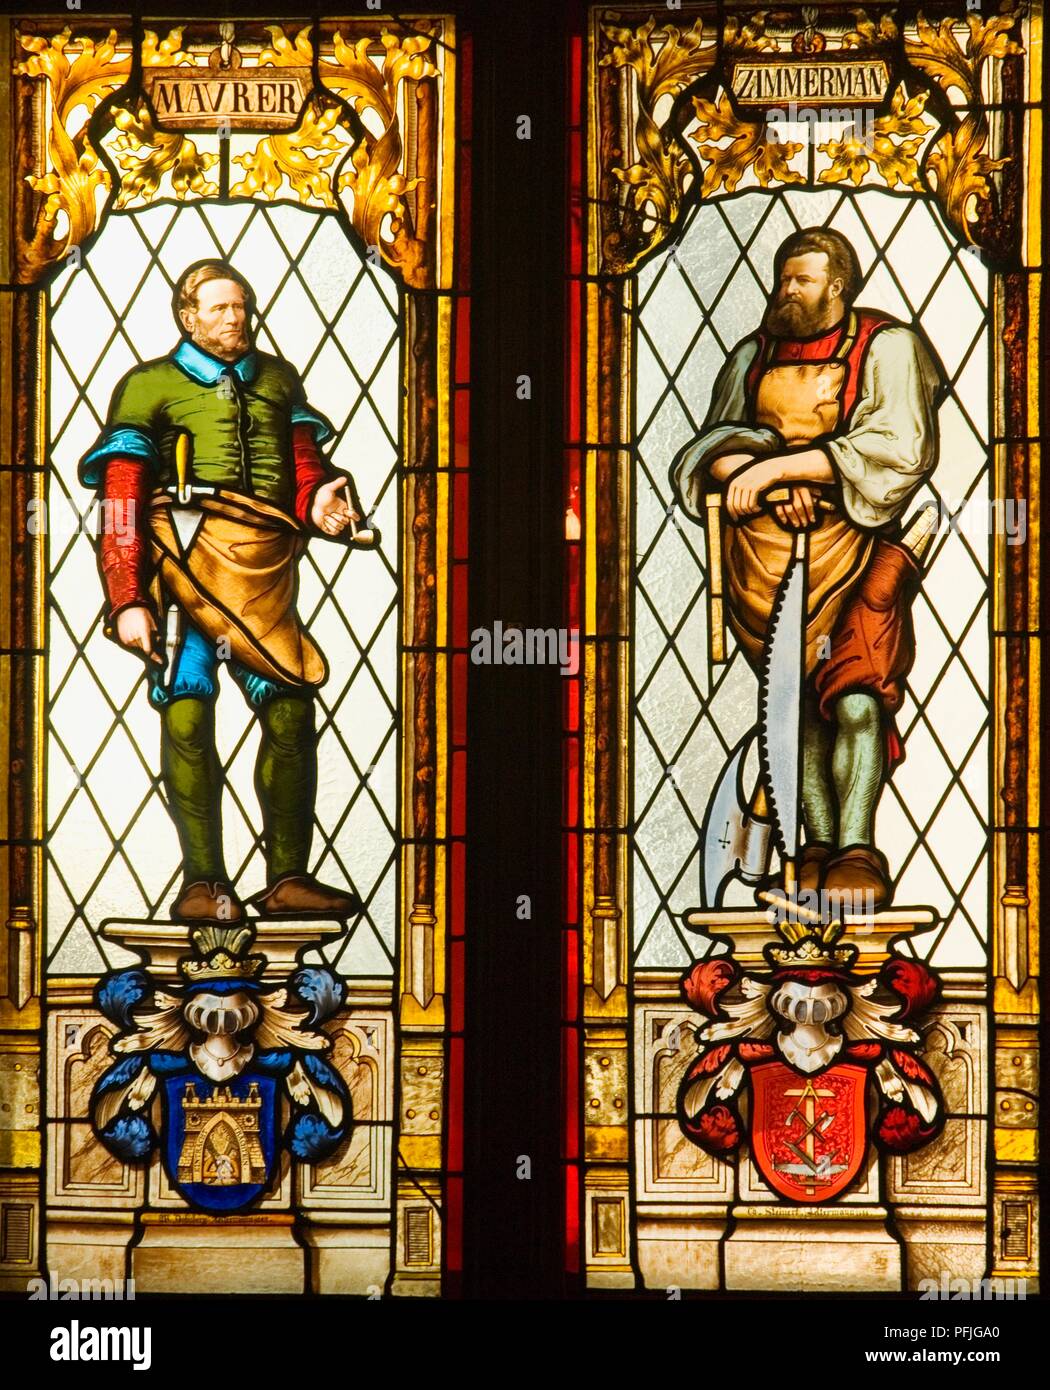 Latvia, Riga, Small Guild Hall, detail of craftsmen on stained glass windows, text in German 'Maurer' (mason) and 'Zimmerman' (carpenter) Stock Photo